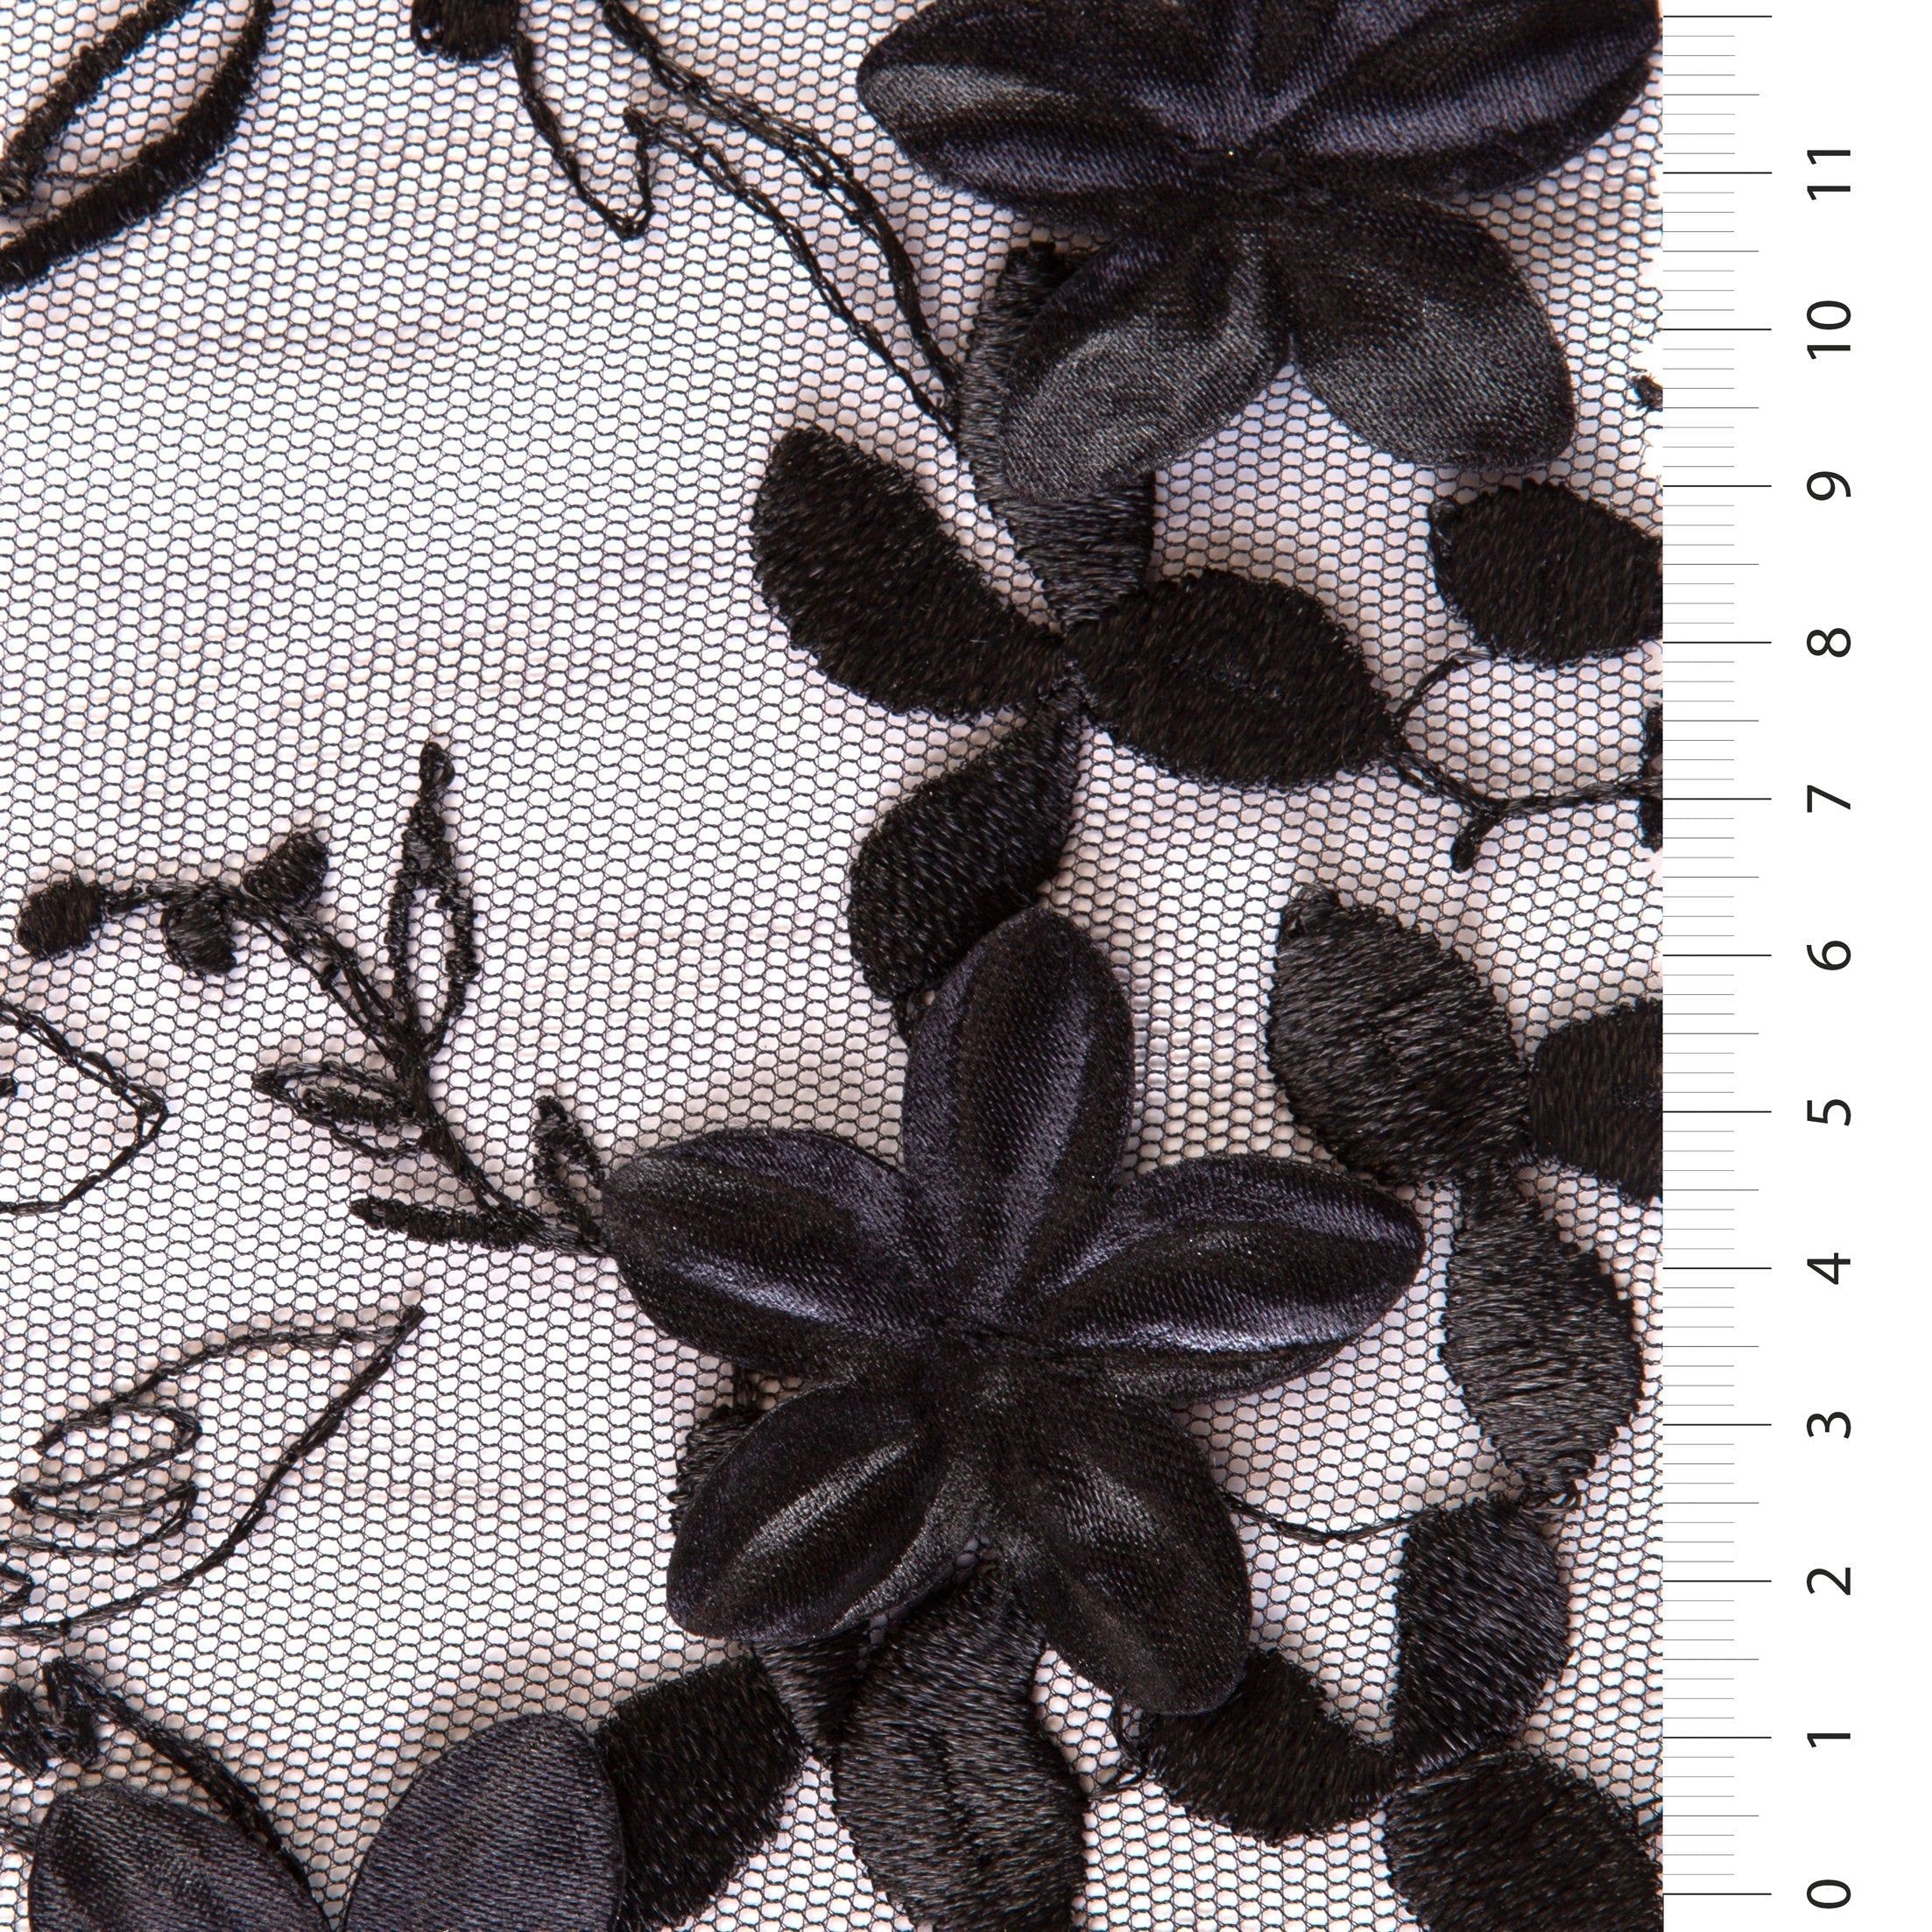 3D Chiffon Floral Embroidery Fabric